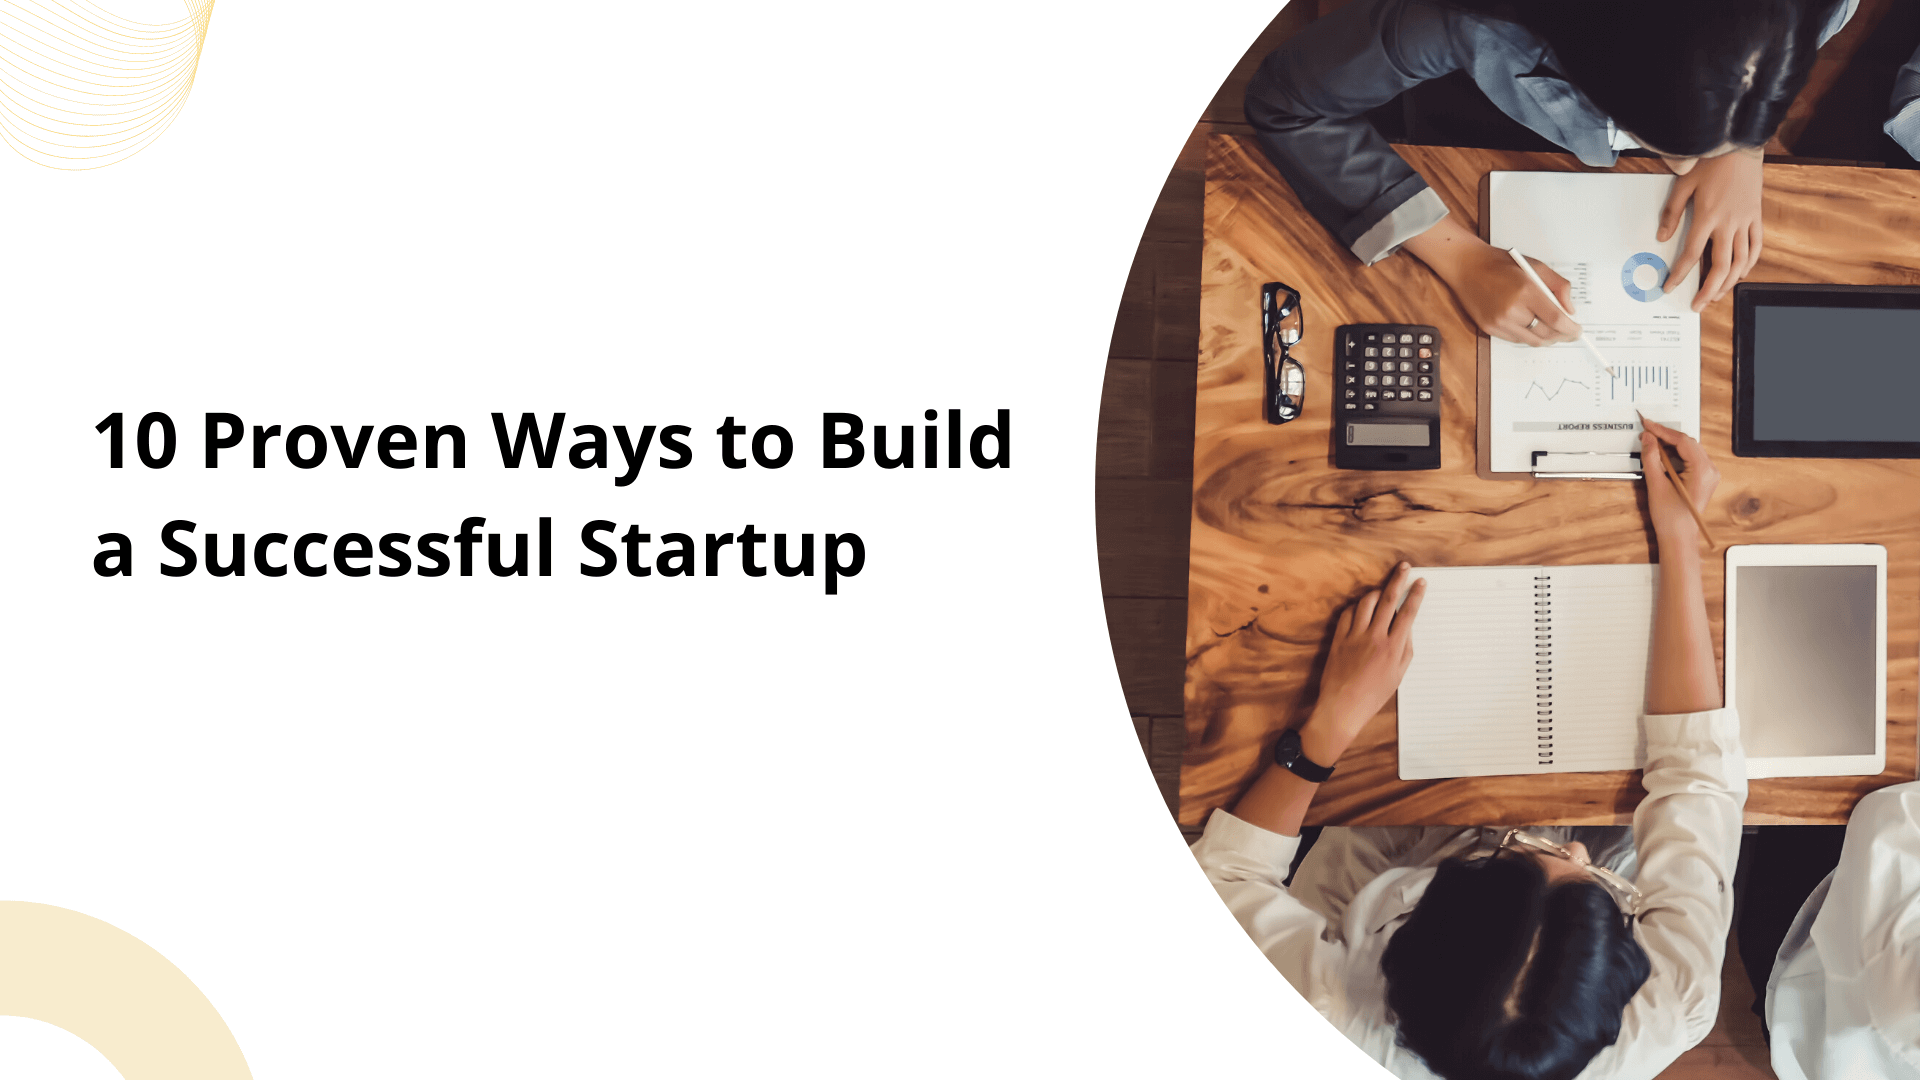 10 Proven Ways to Build a Successful Startup